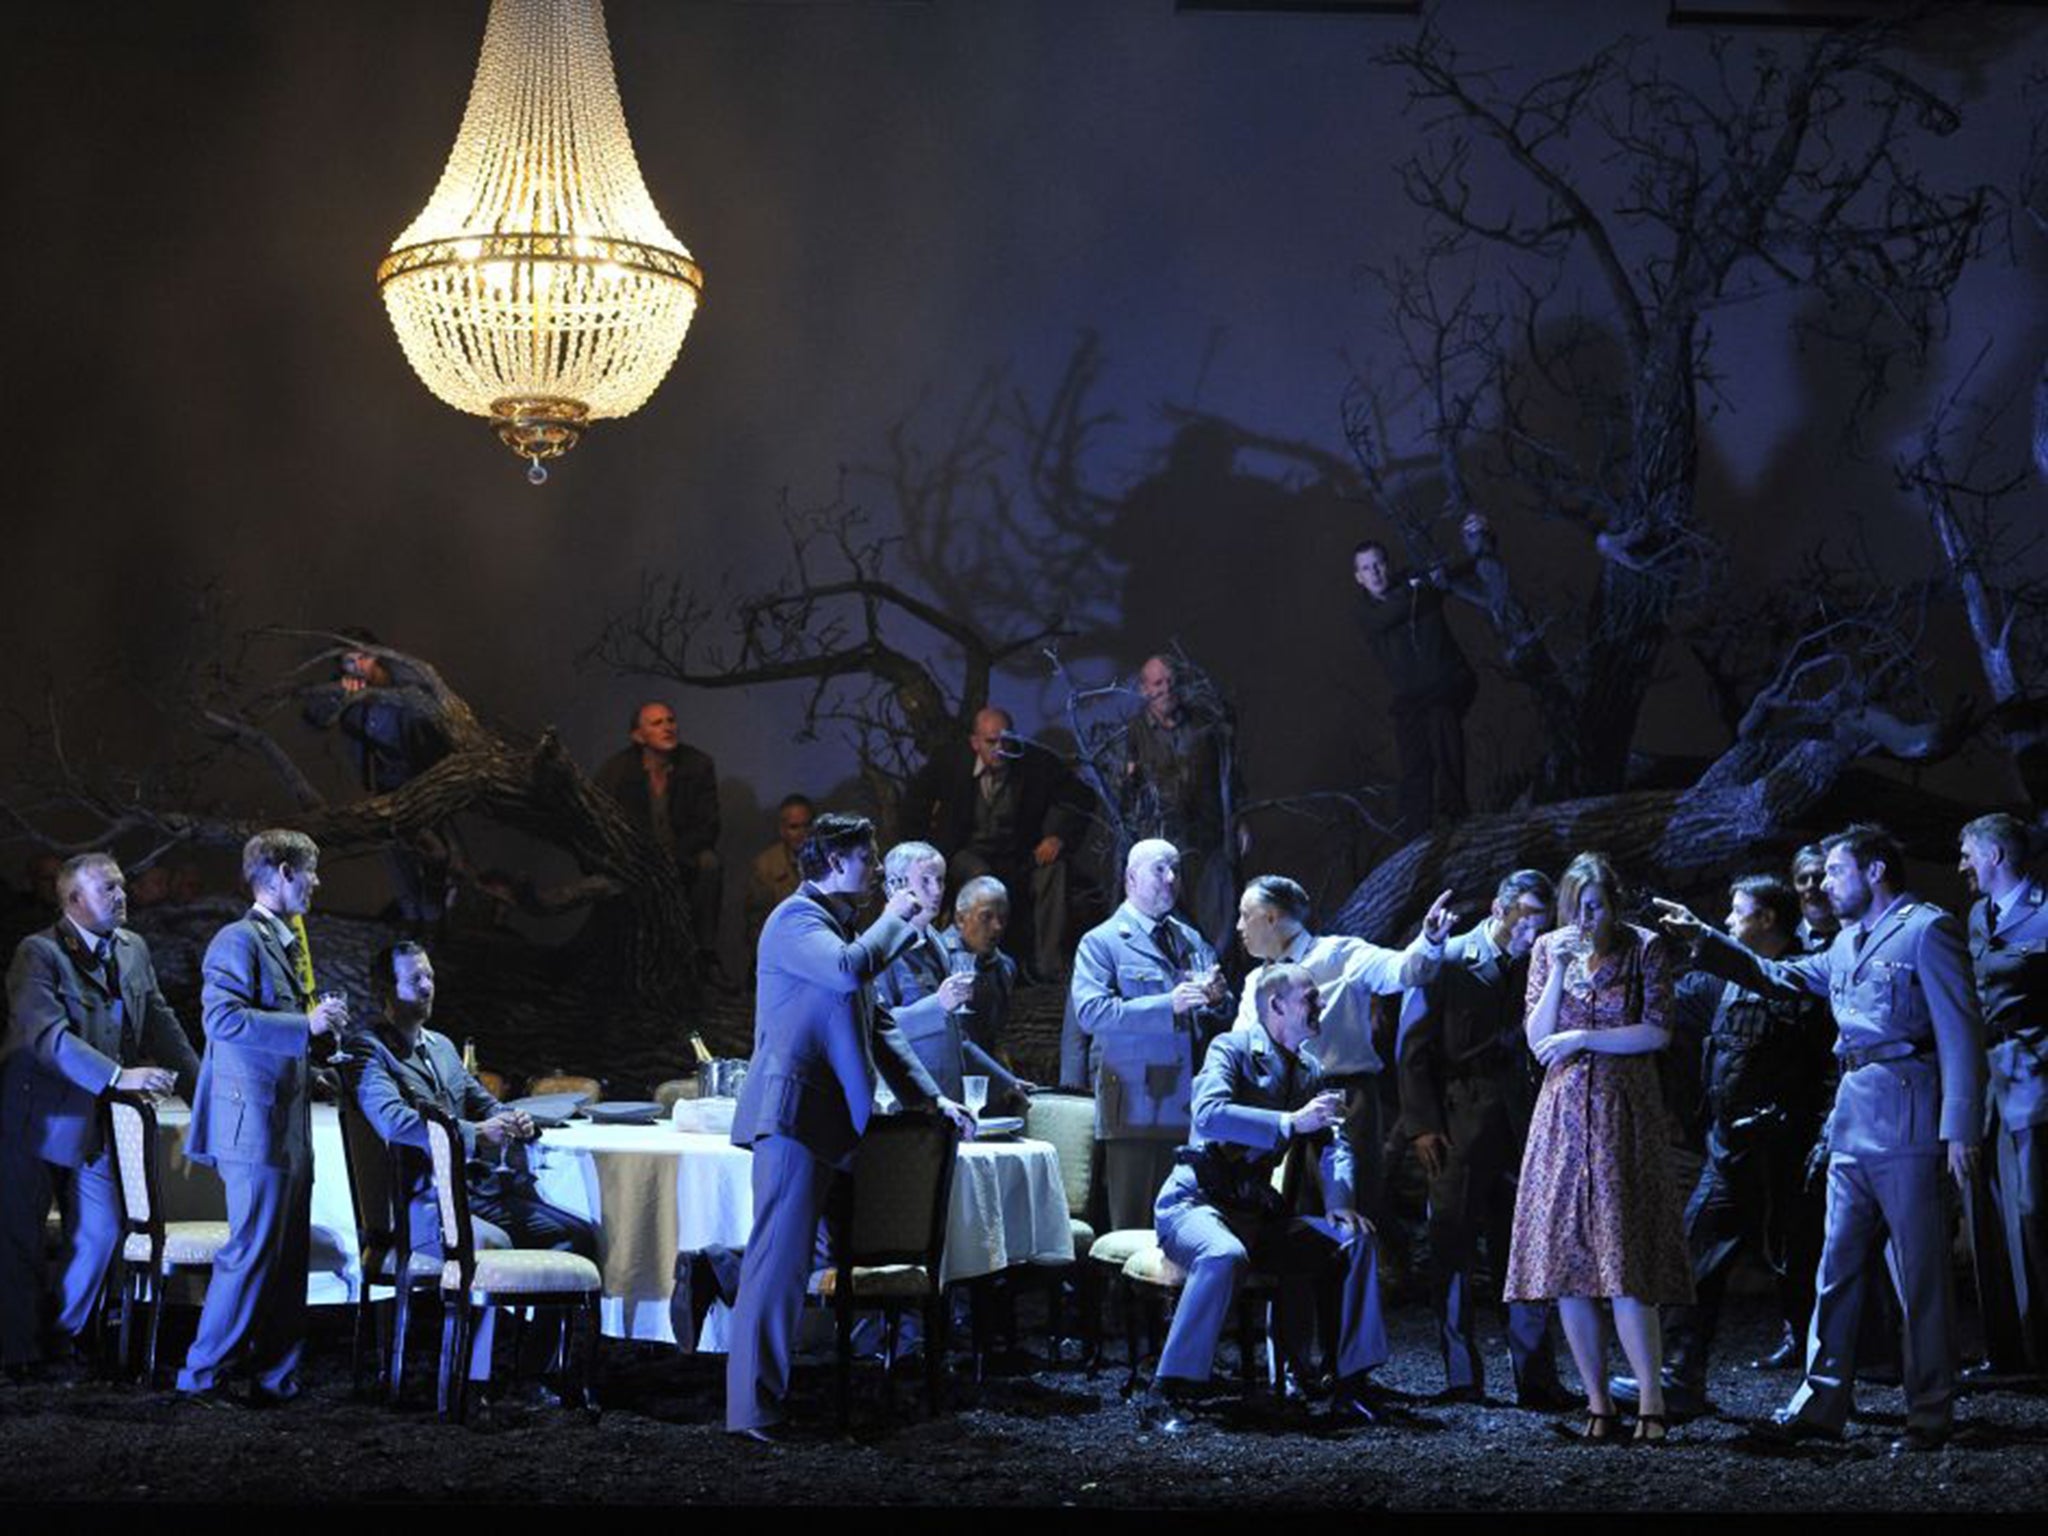 The gang rape scene in the Royal Opera’s production of Gioachino Rossini’s Guillaume Tell has caused huge controversy